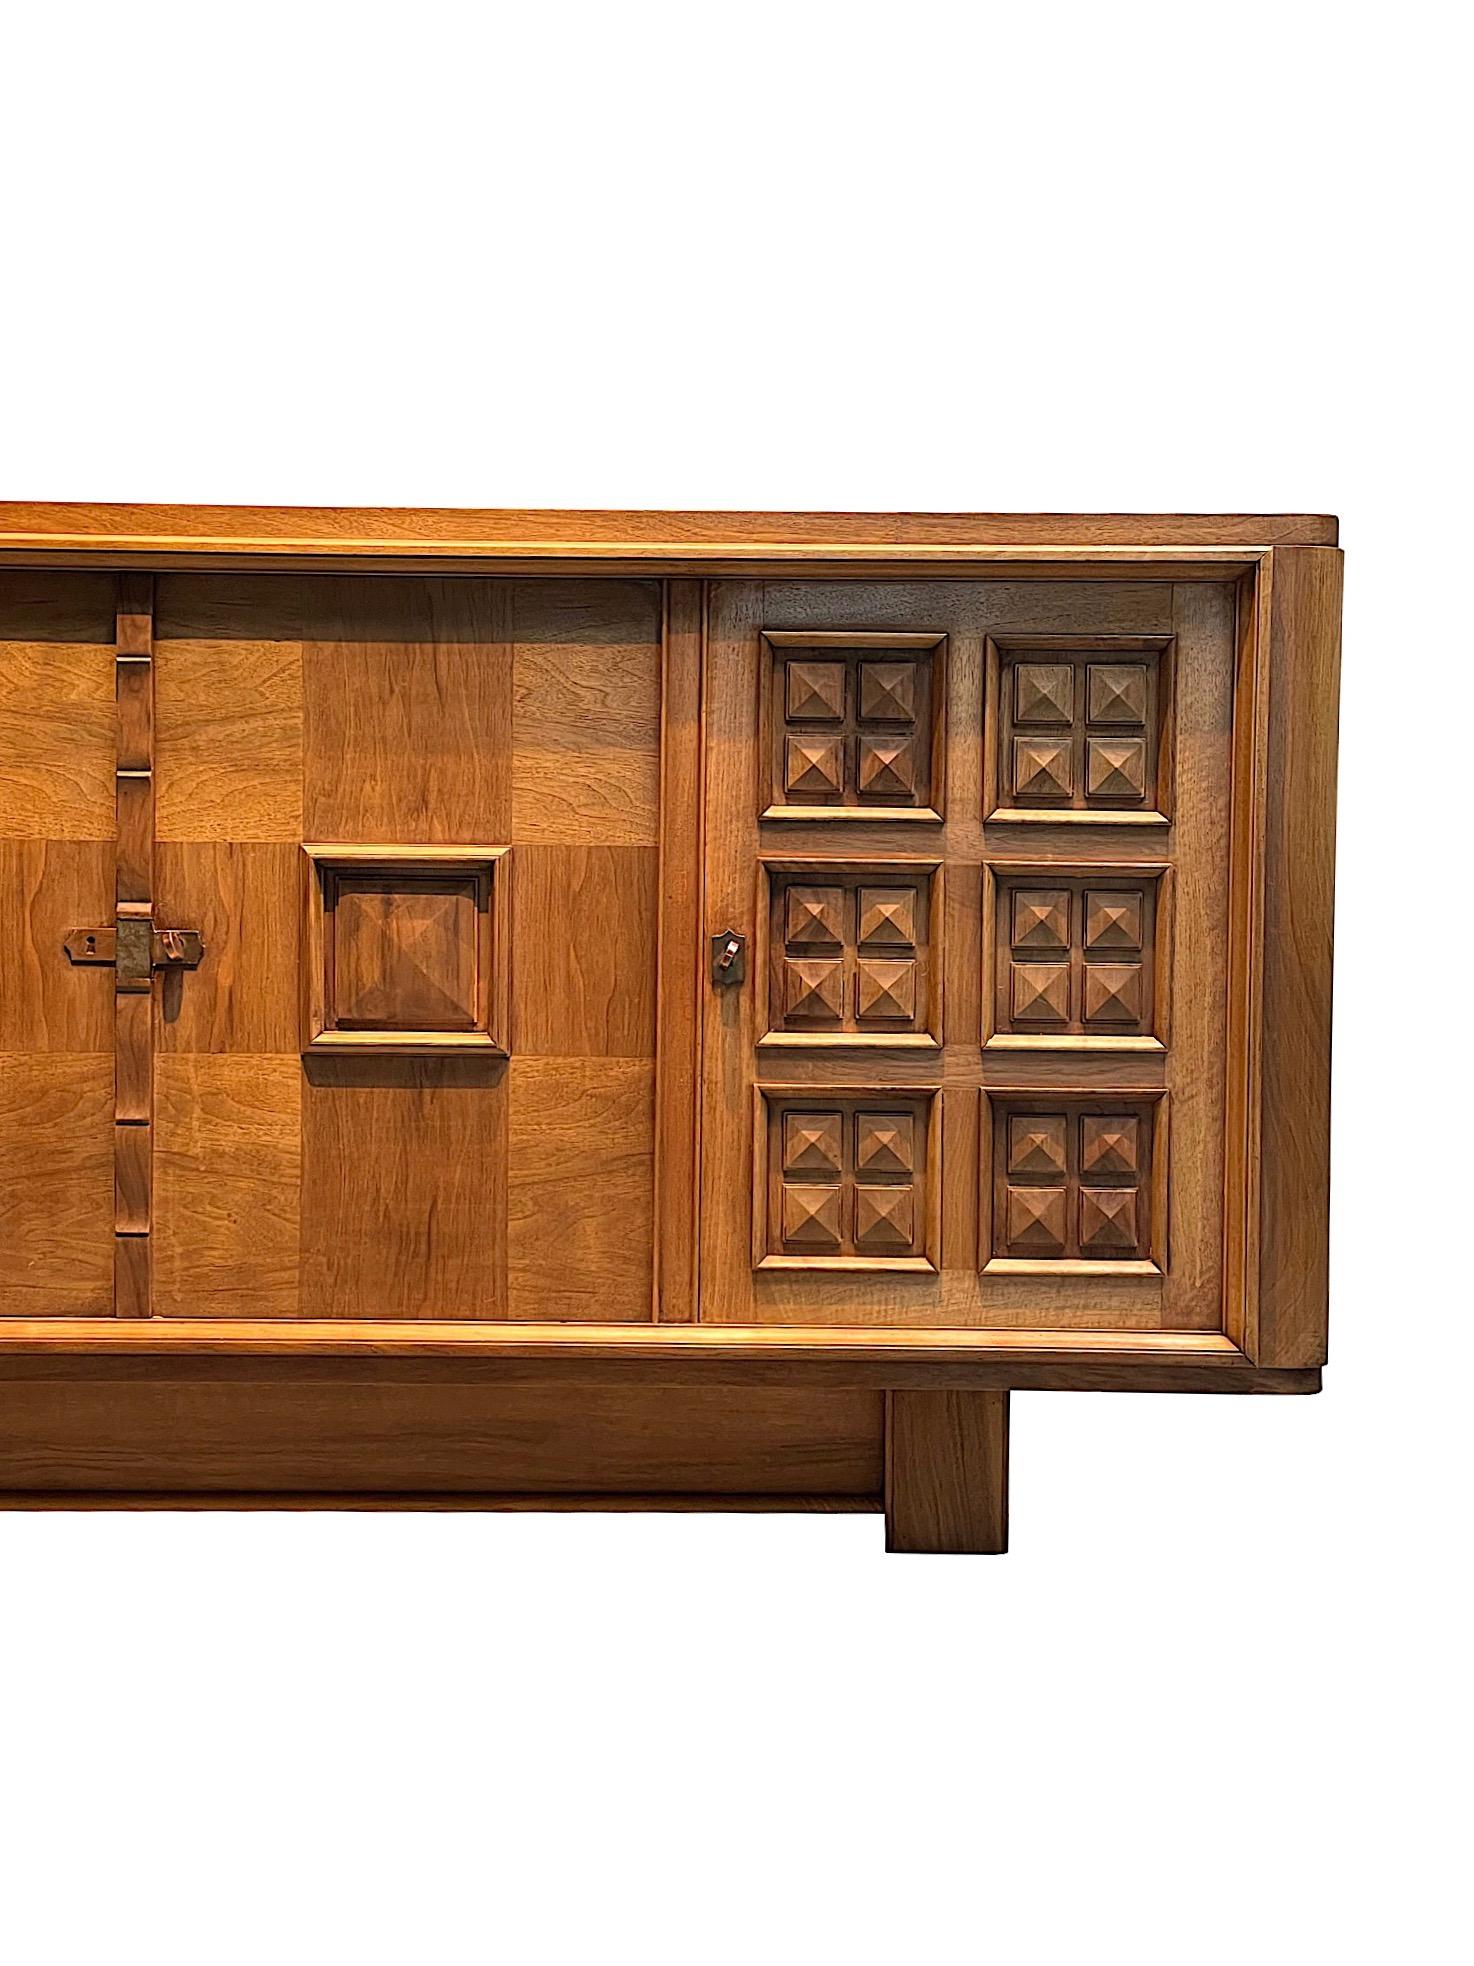 1940's French four door credenza in the style of Charles Dudouyt.
Two doors with decorative pyramid shaped raised panels.
Two doors and top with checkerboard design.
Walnut.
Three Interior shelves and two interior drawers.
ARRIVING AUGUST.